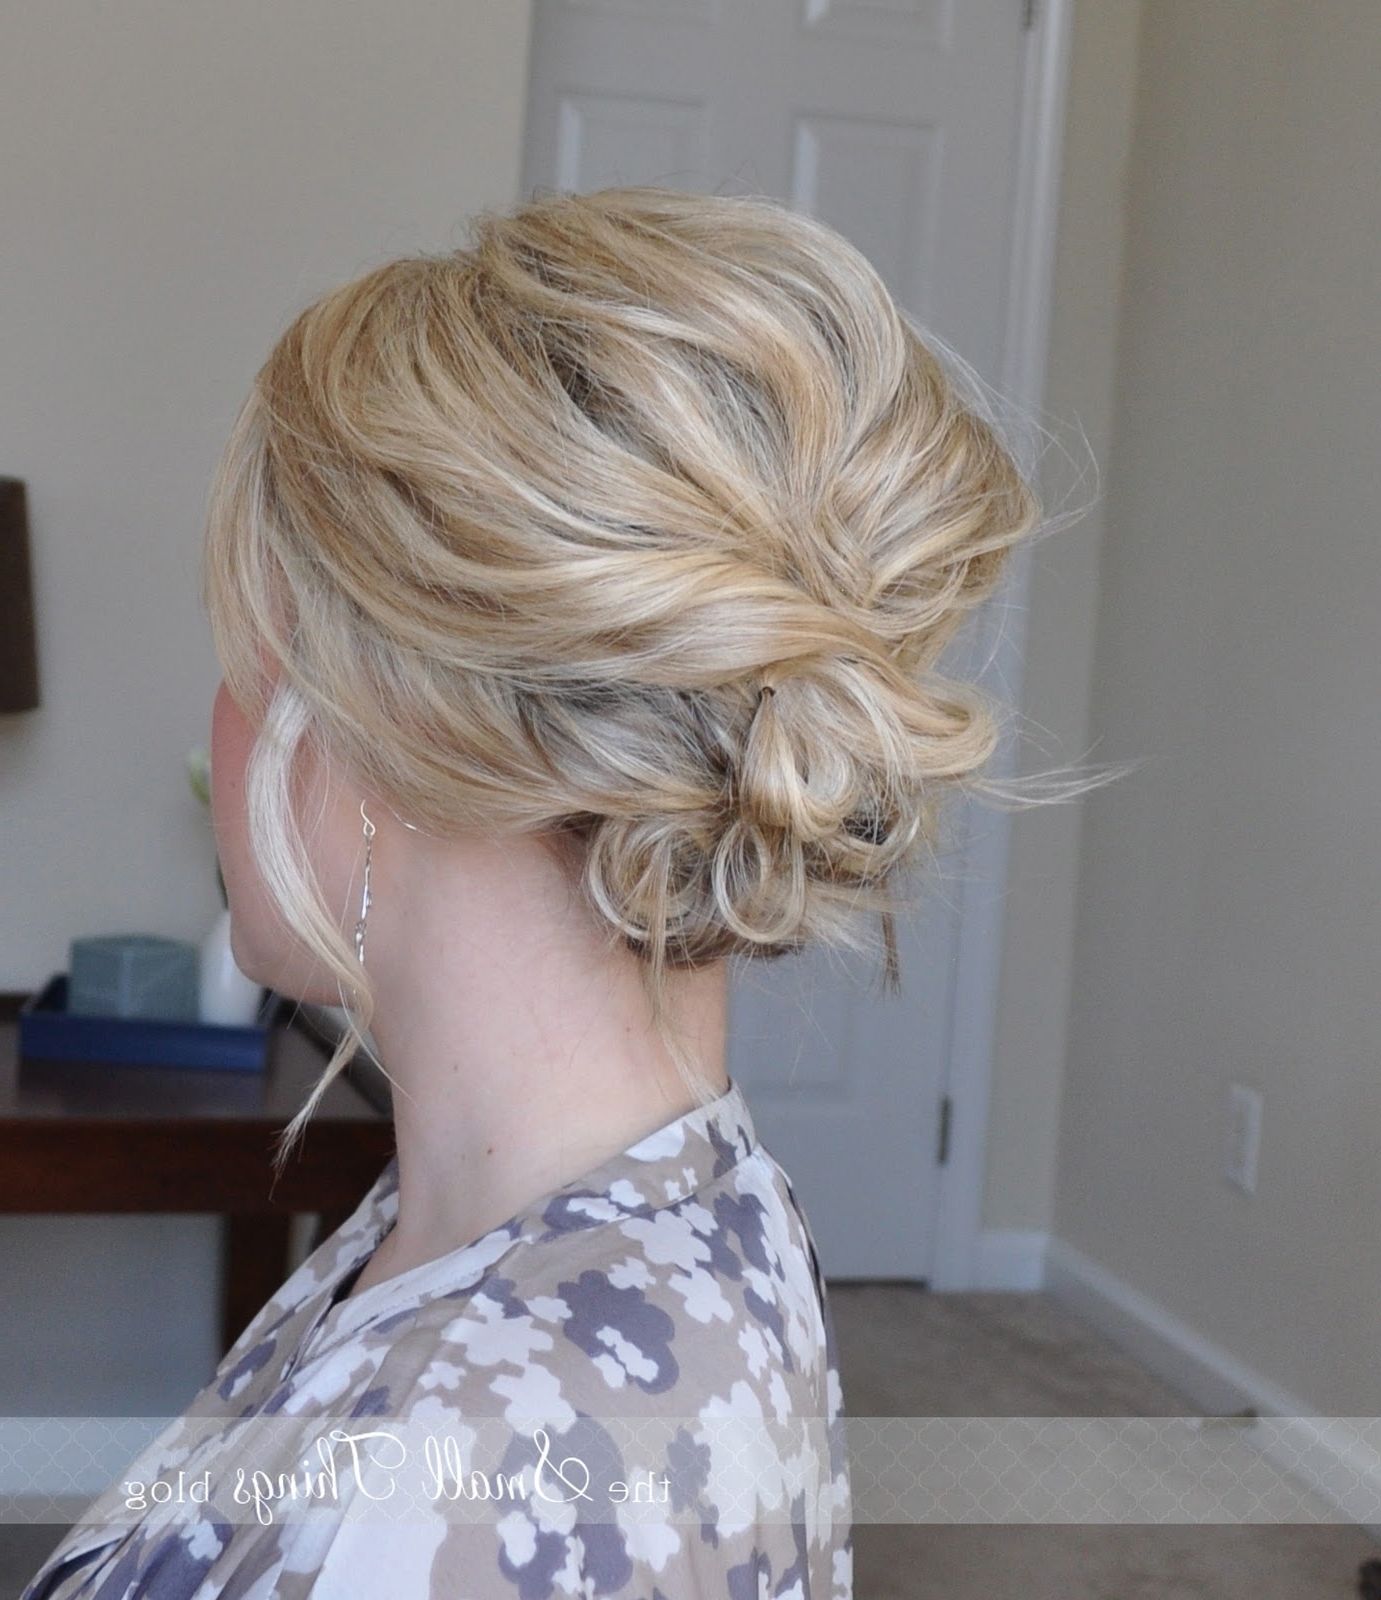 Beach Wedding Hairstyles For Medium Length Hair – Hairstyle For Throughout Loose Updo Hairstyles For Medium Length Hair (View 15 of 15)